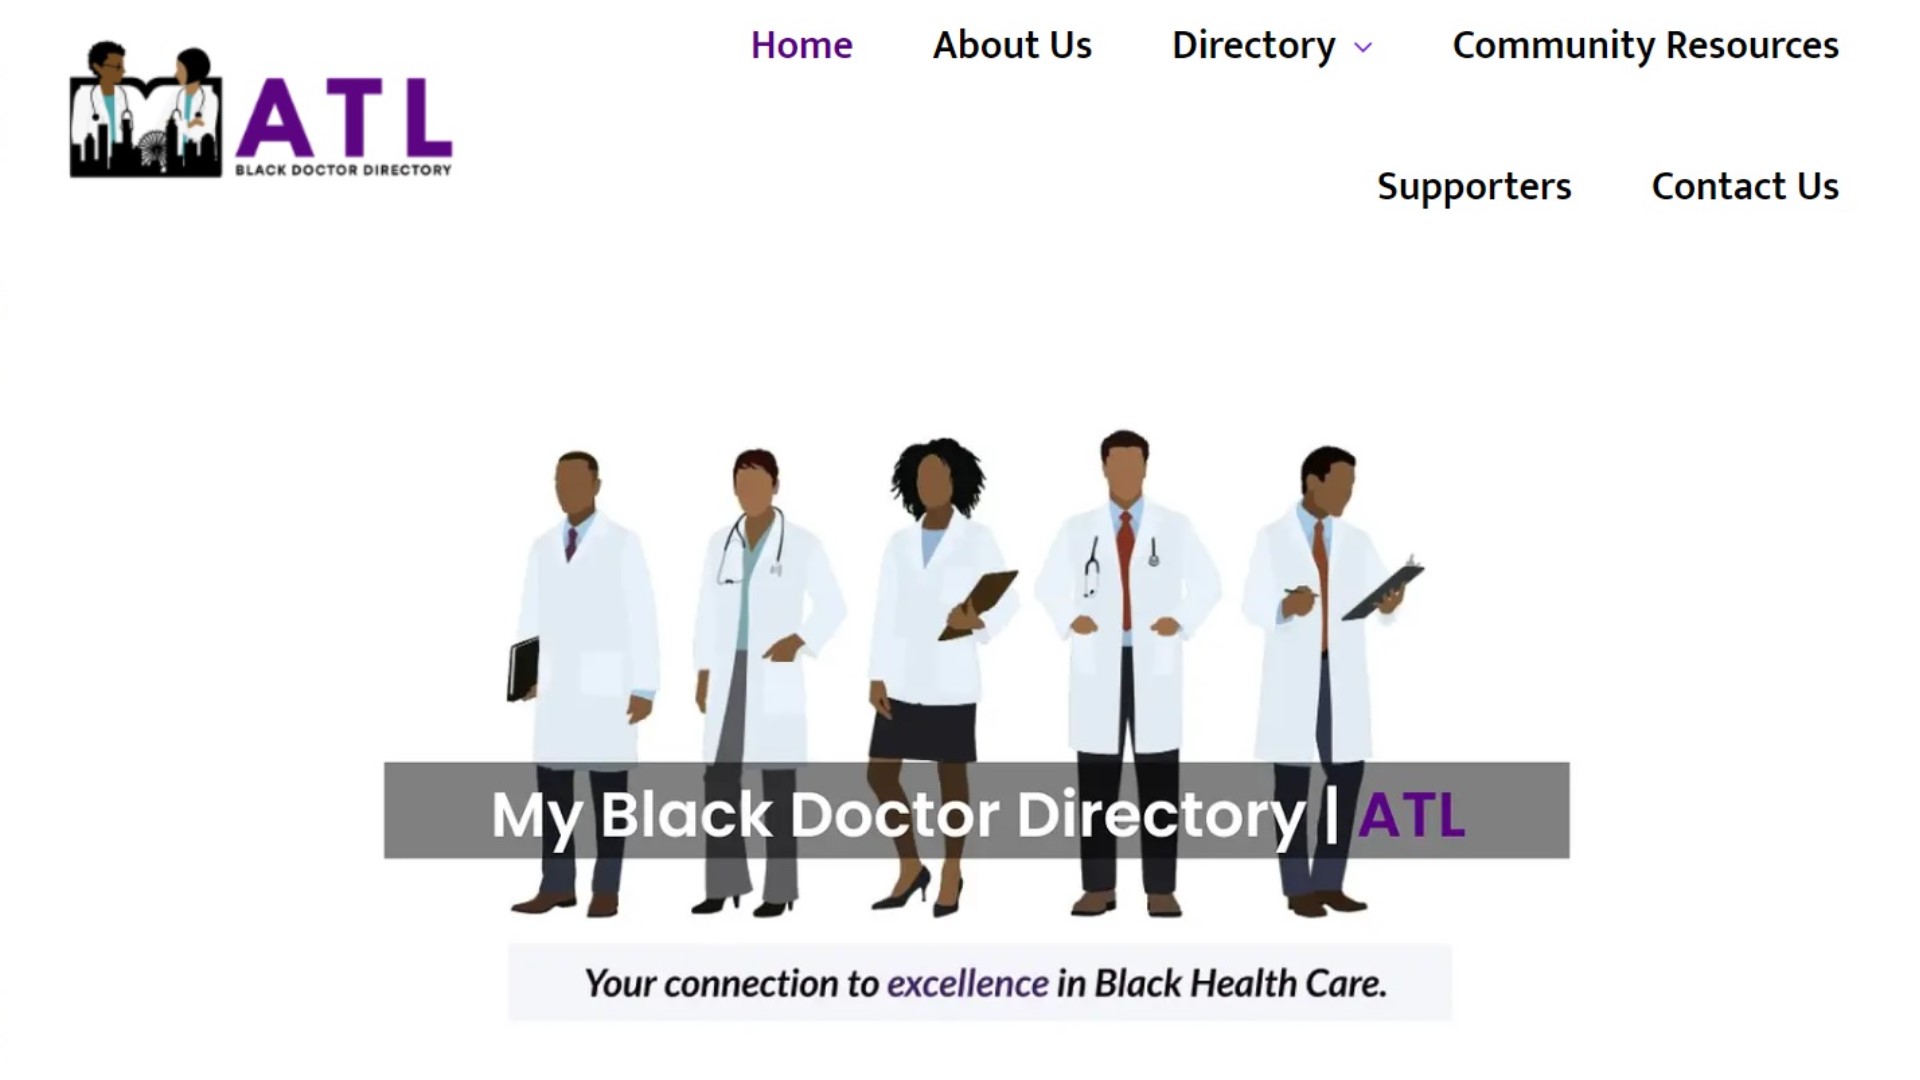 Dr. Frank Jones of Atlanta made the My Black Doctor Directory to address health disparities in the Black community.